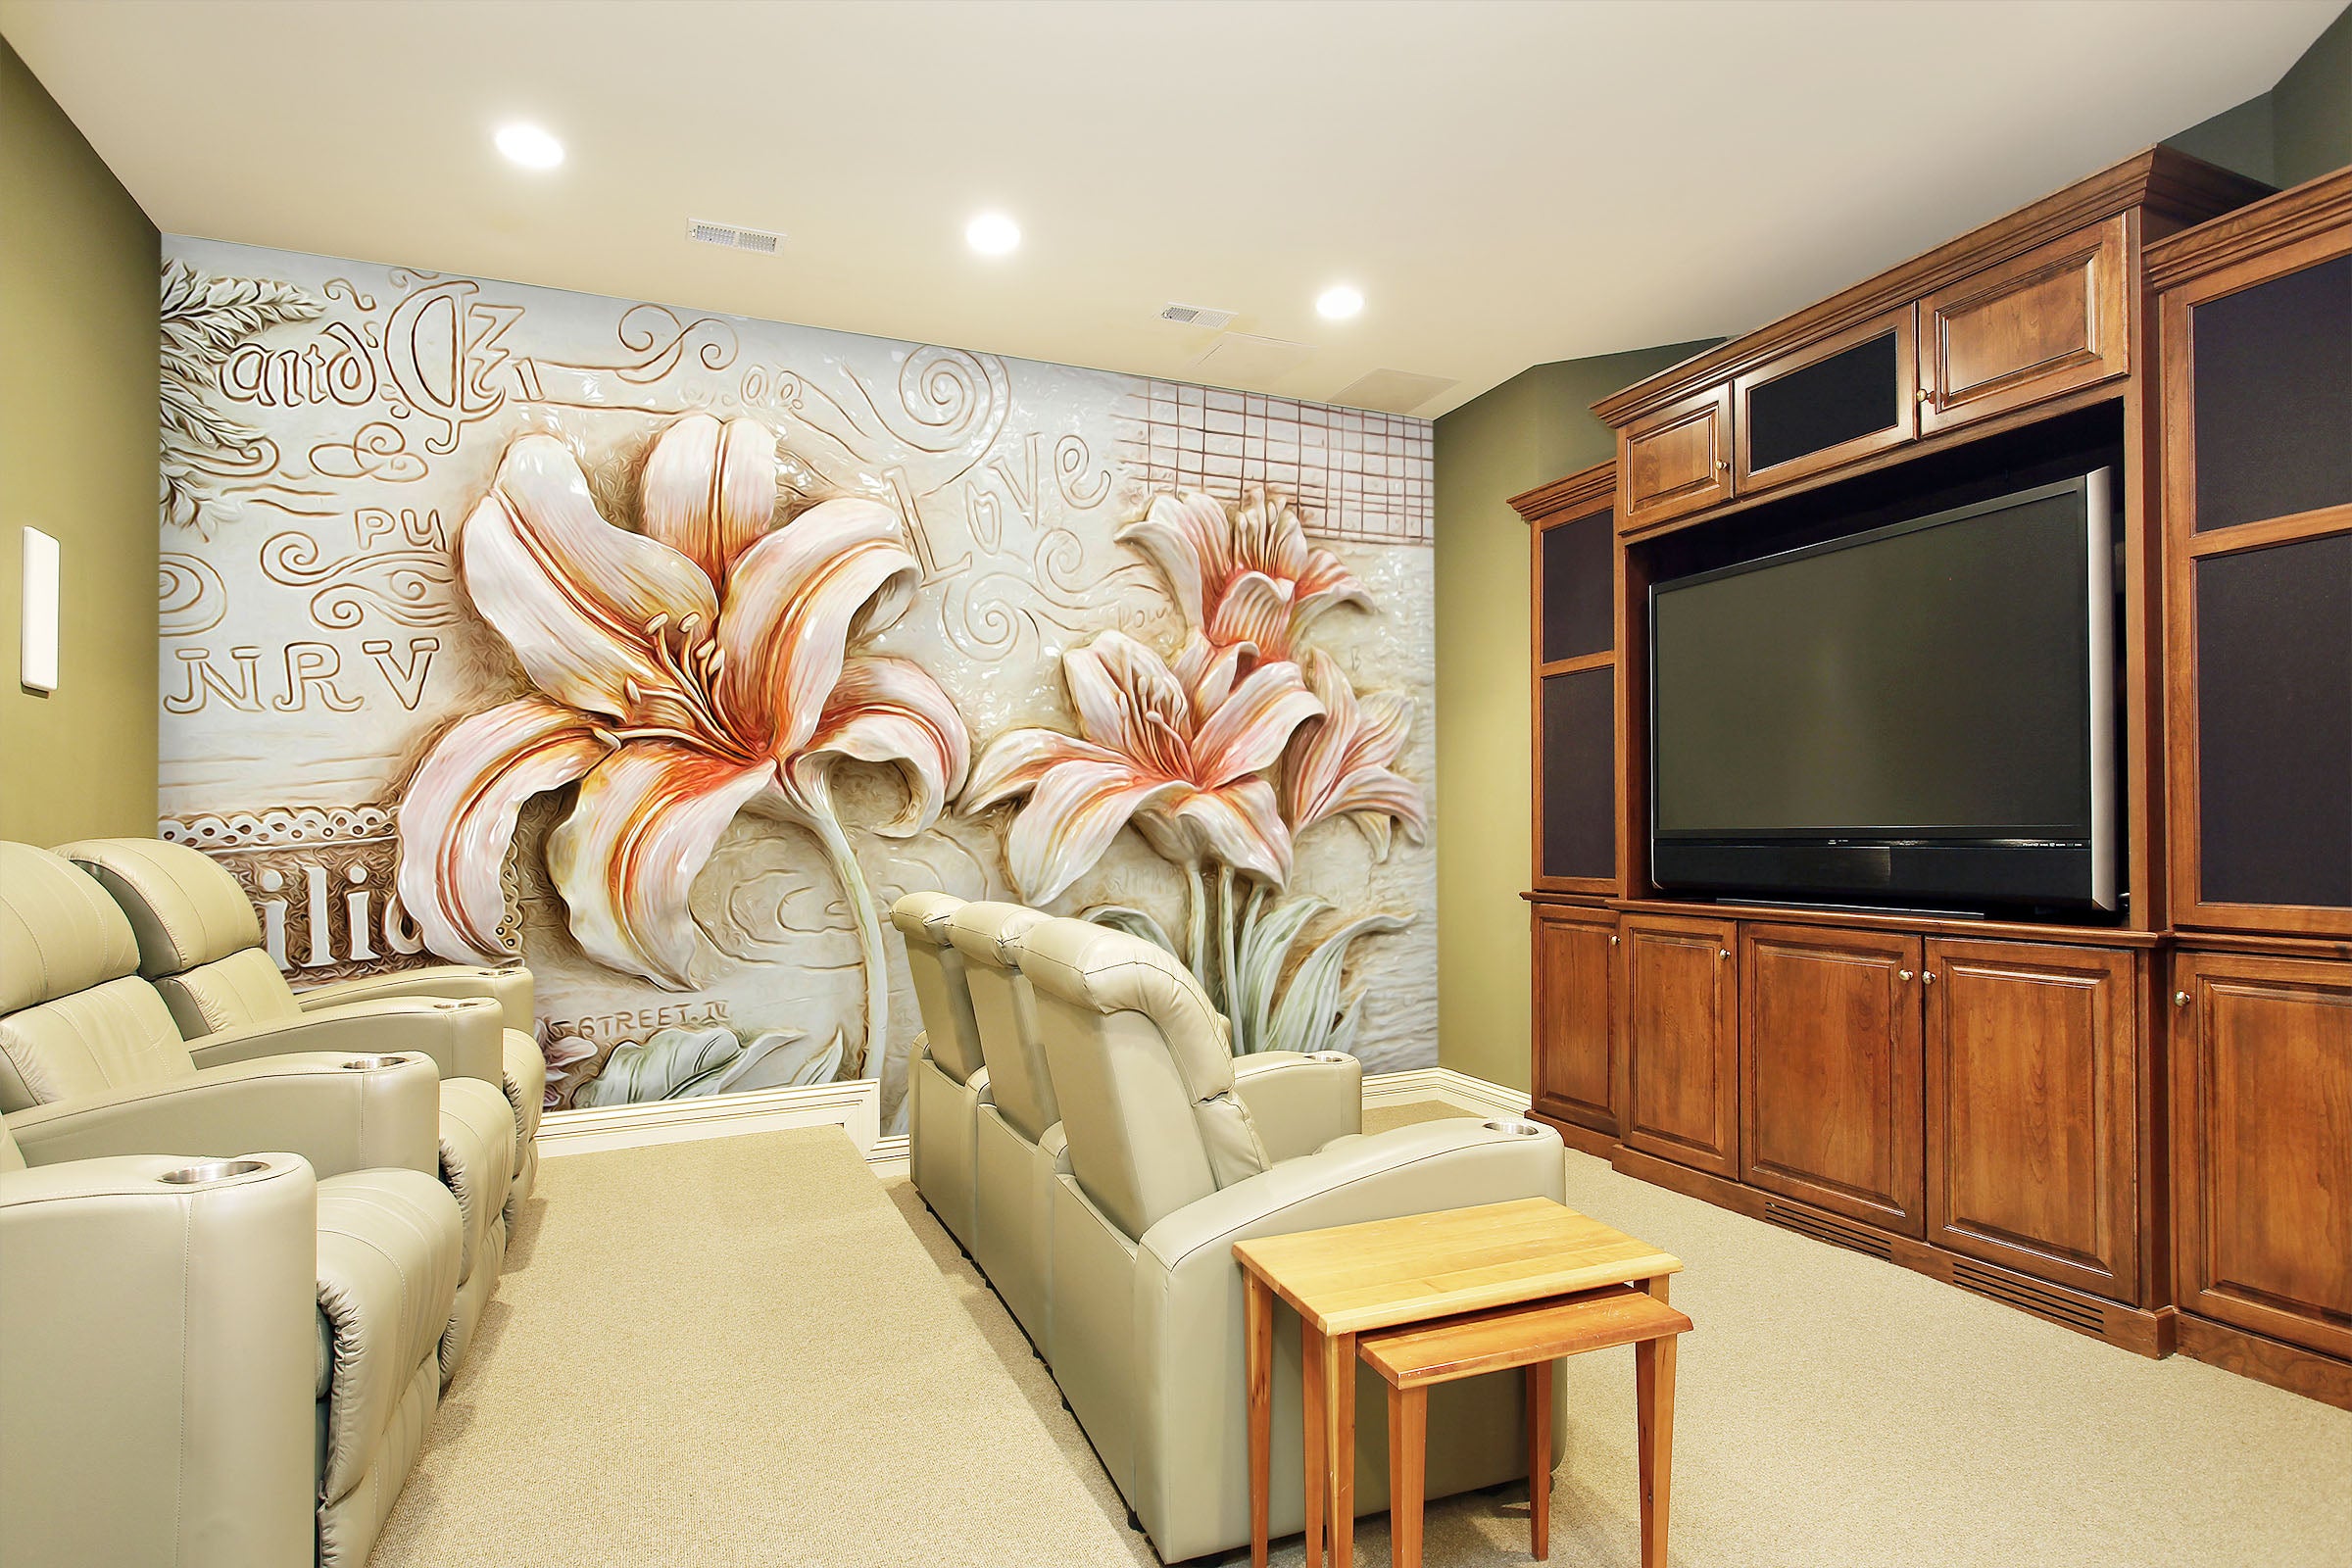 3D Embossed Lily 135 Wall Murals